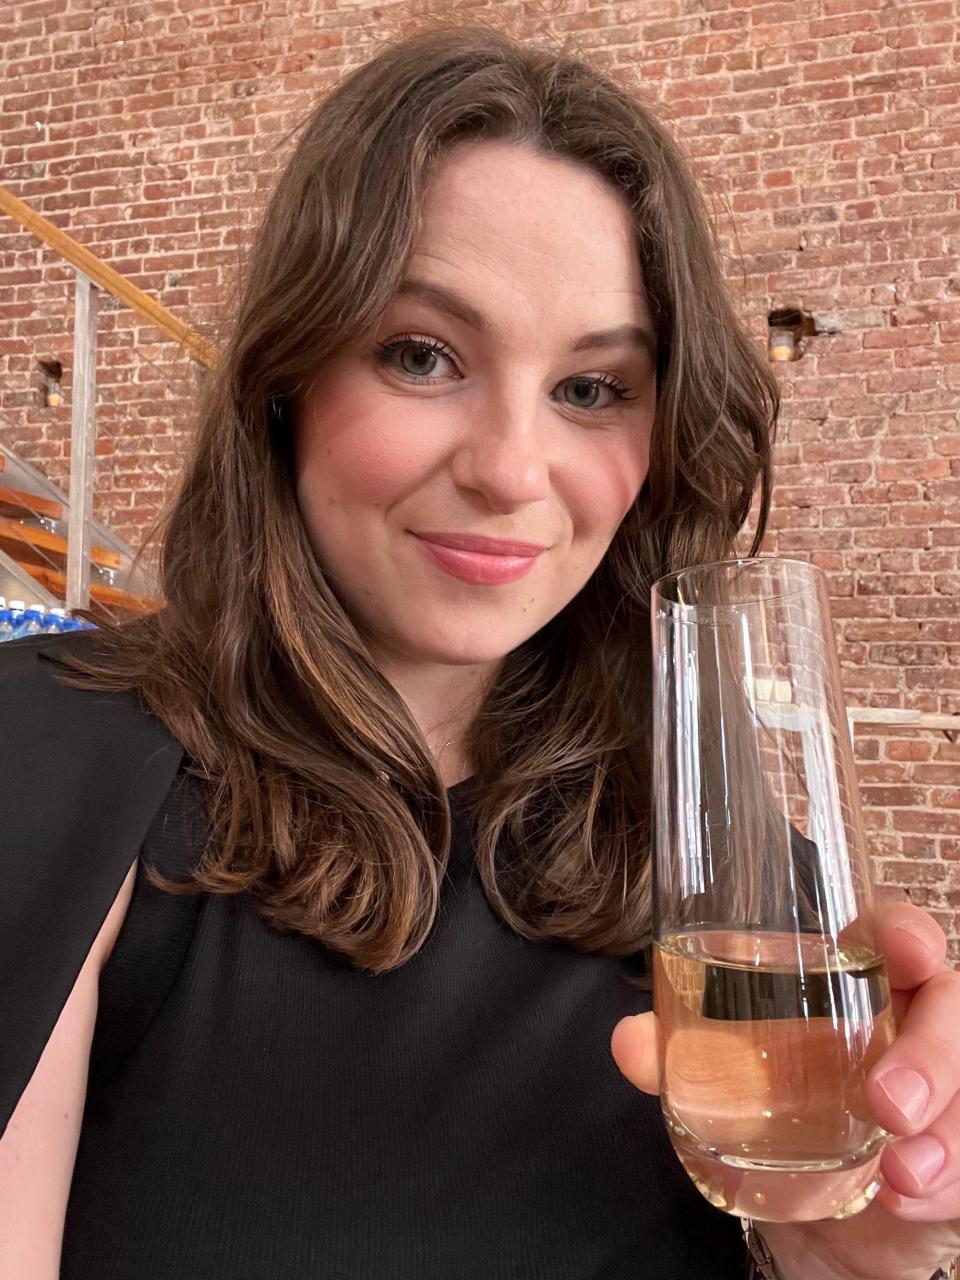 A woman holds up a glass of champagne in a selfie.